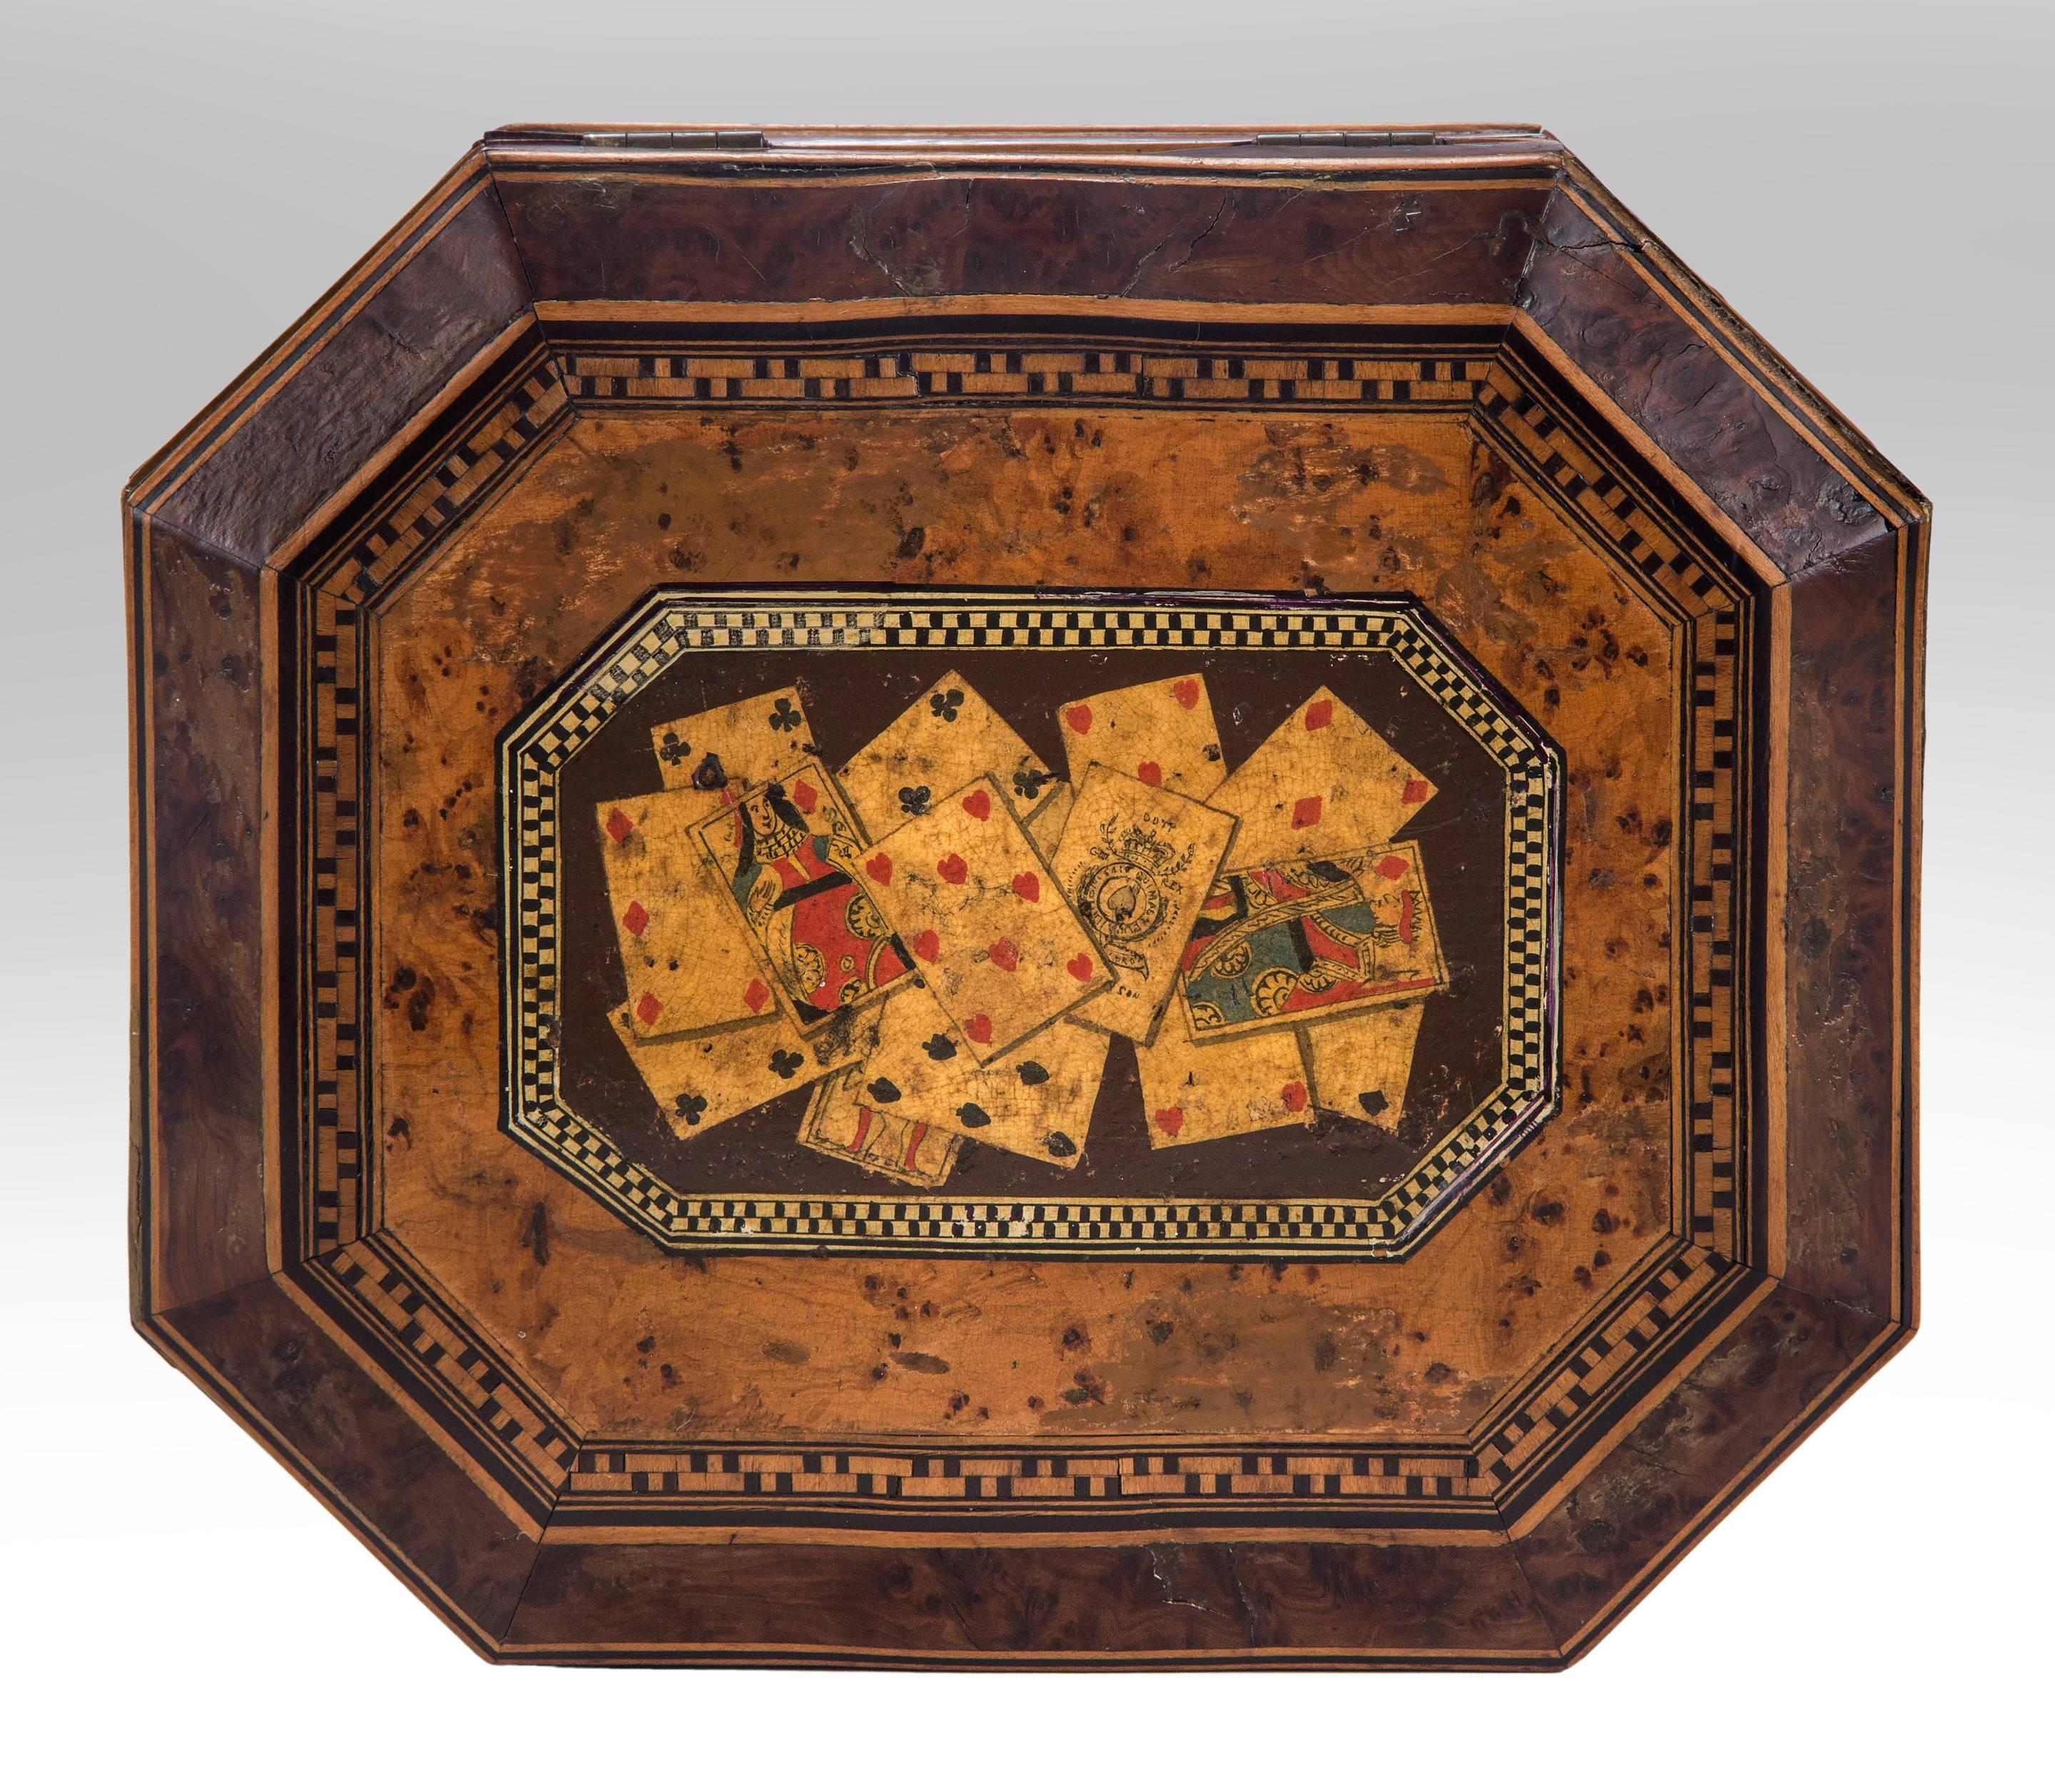 Octagonal box with playing cards
19th century
A charming box with delightful playing card motif adorning the lid. Of octagonal shape, the burl wood top with parquetry boarders centring a selection of playing cards, the conforming burl wood box